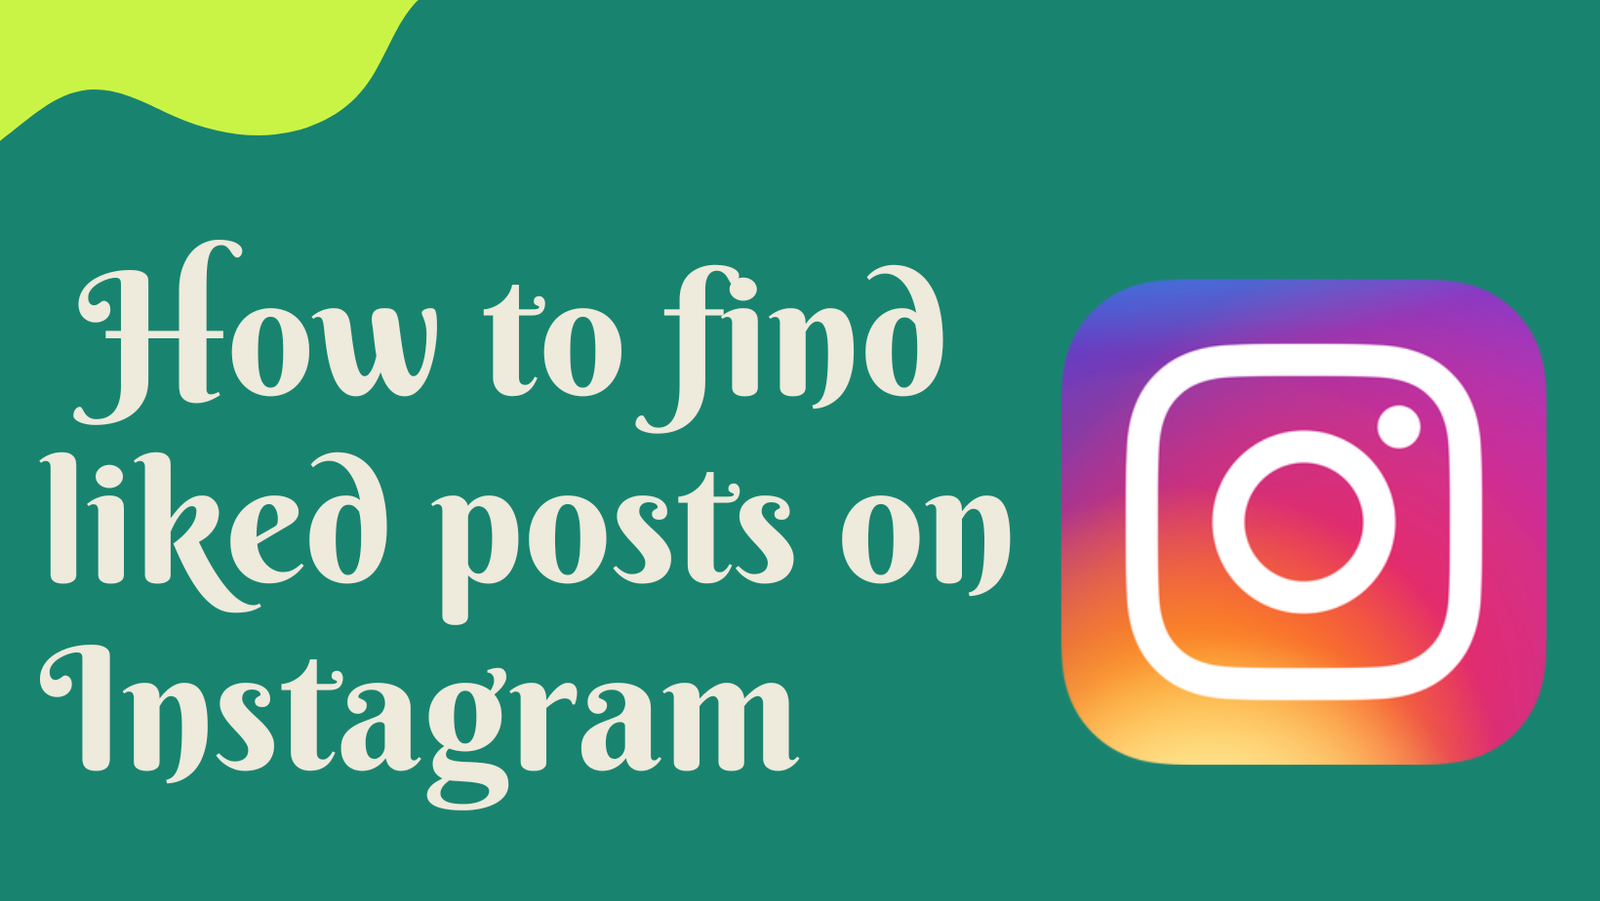 find liked posts on Instagram